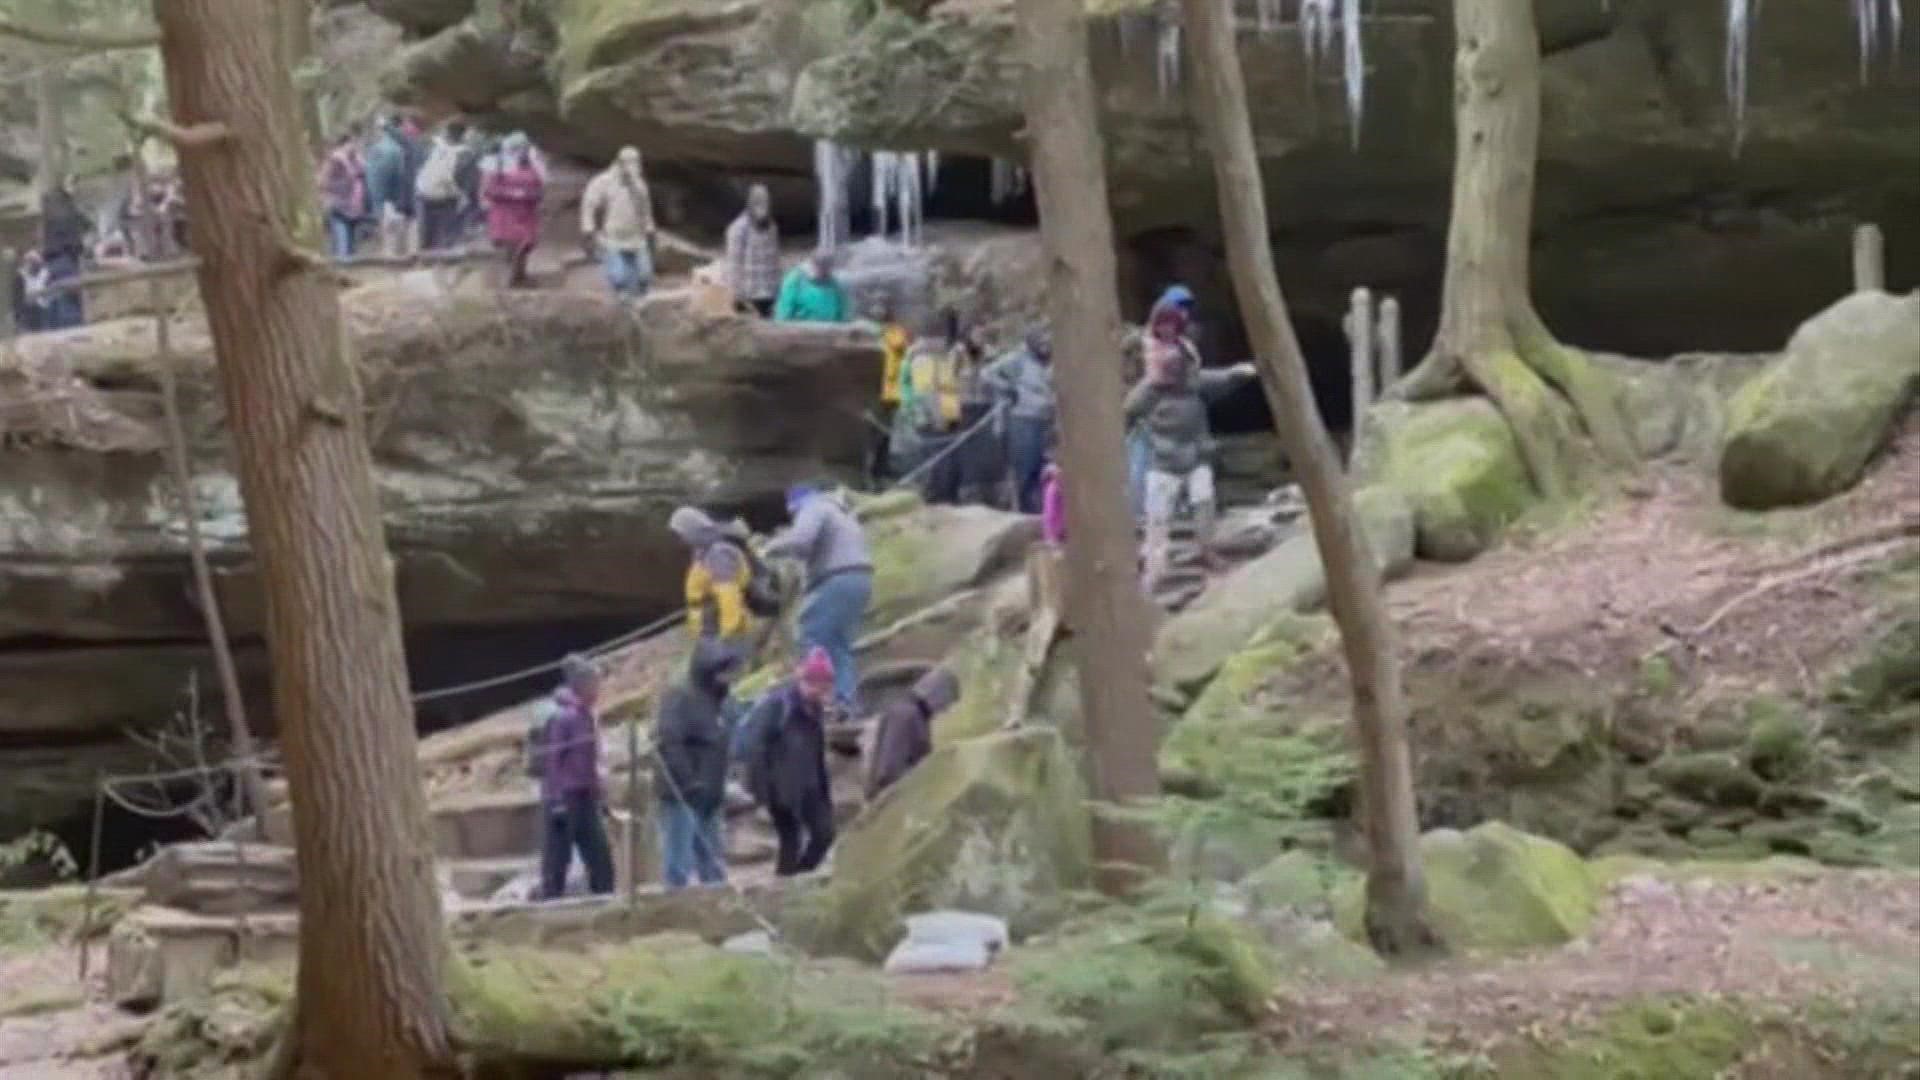 The Ohio Department of Natural Resources celebrated their Winter Hike Challenge this weekend in Hocking Hills.